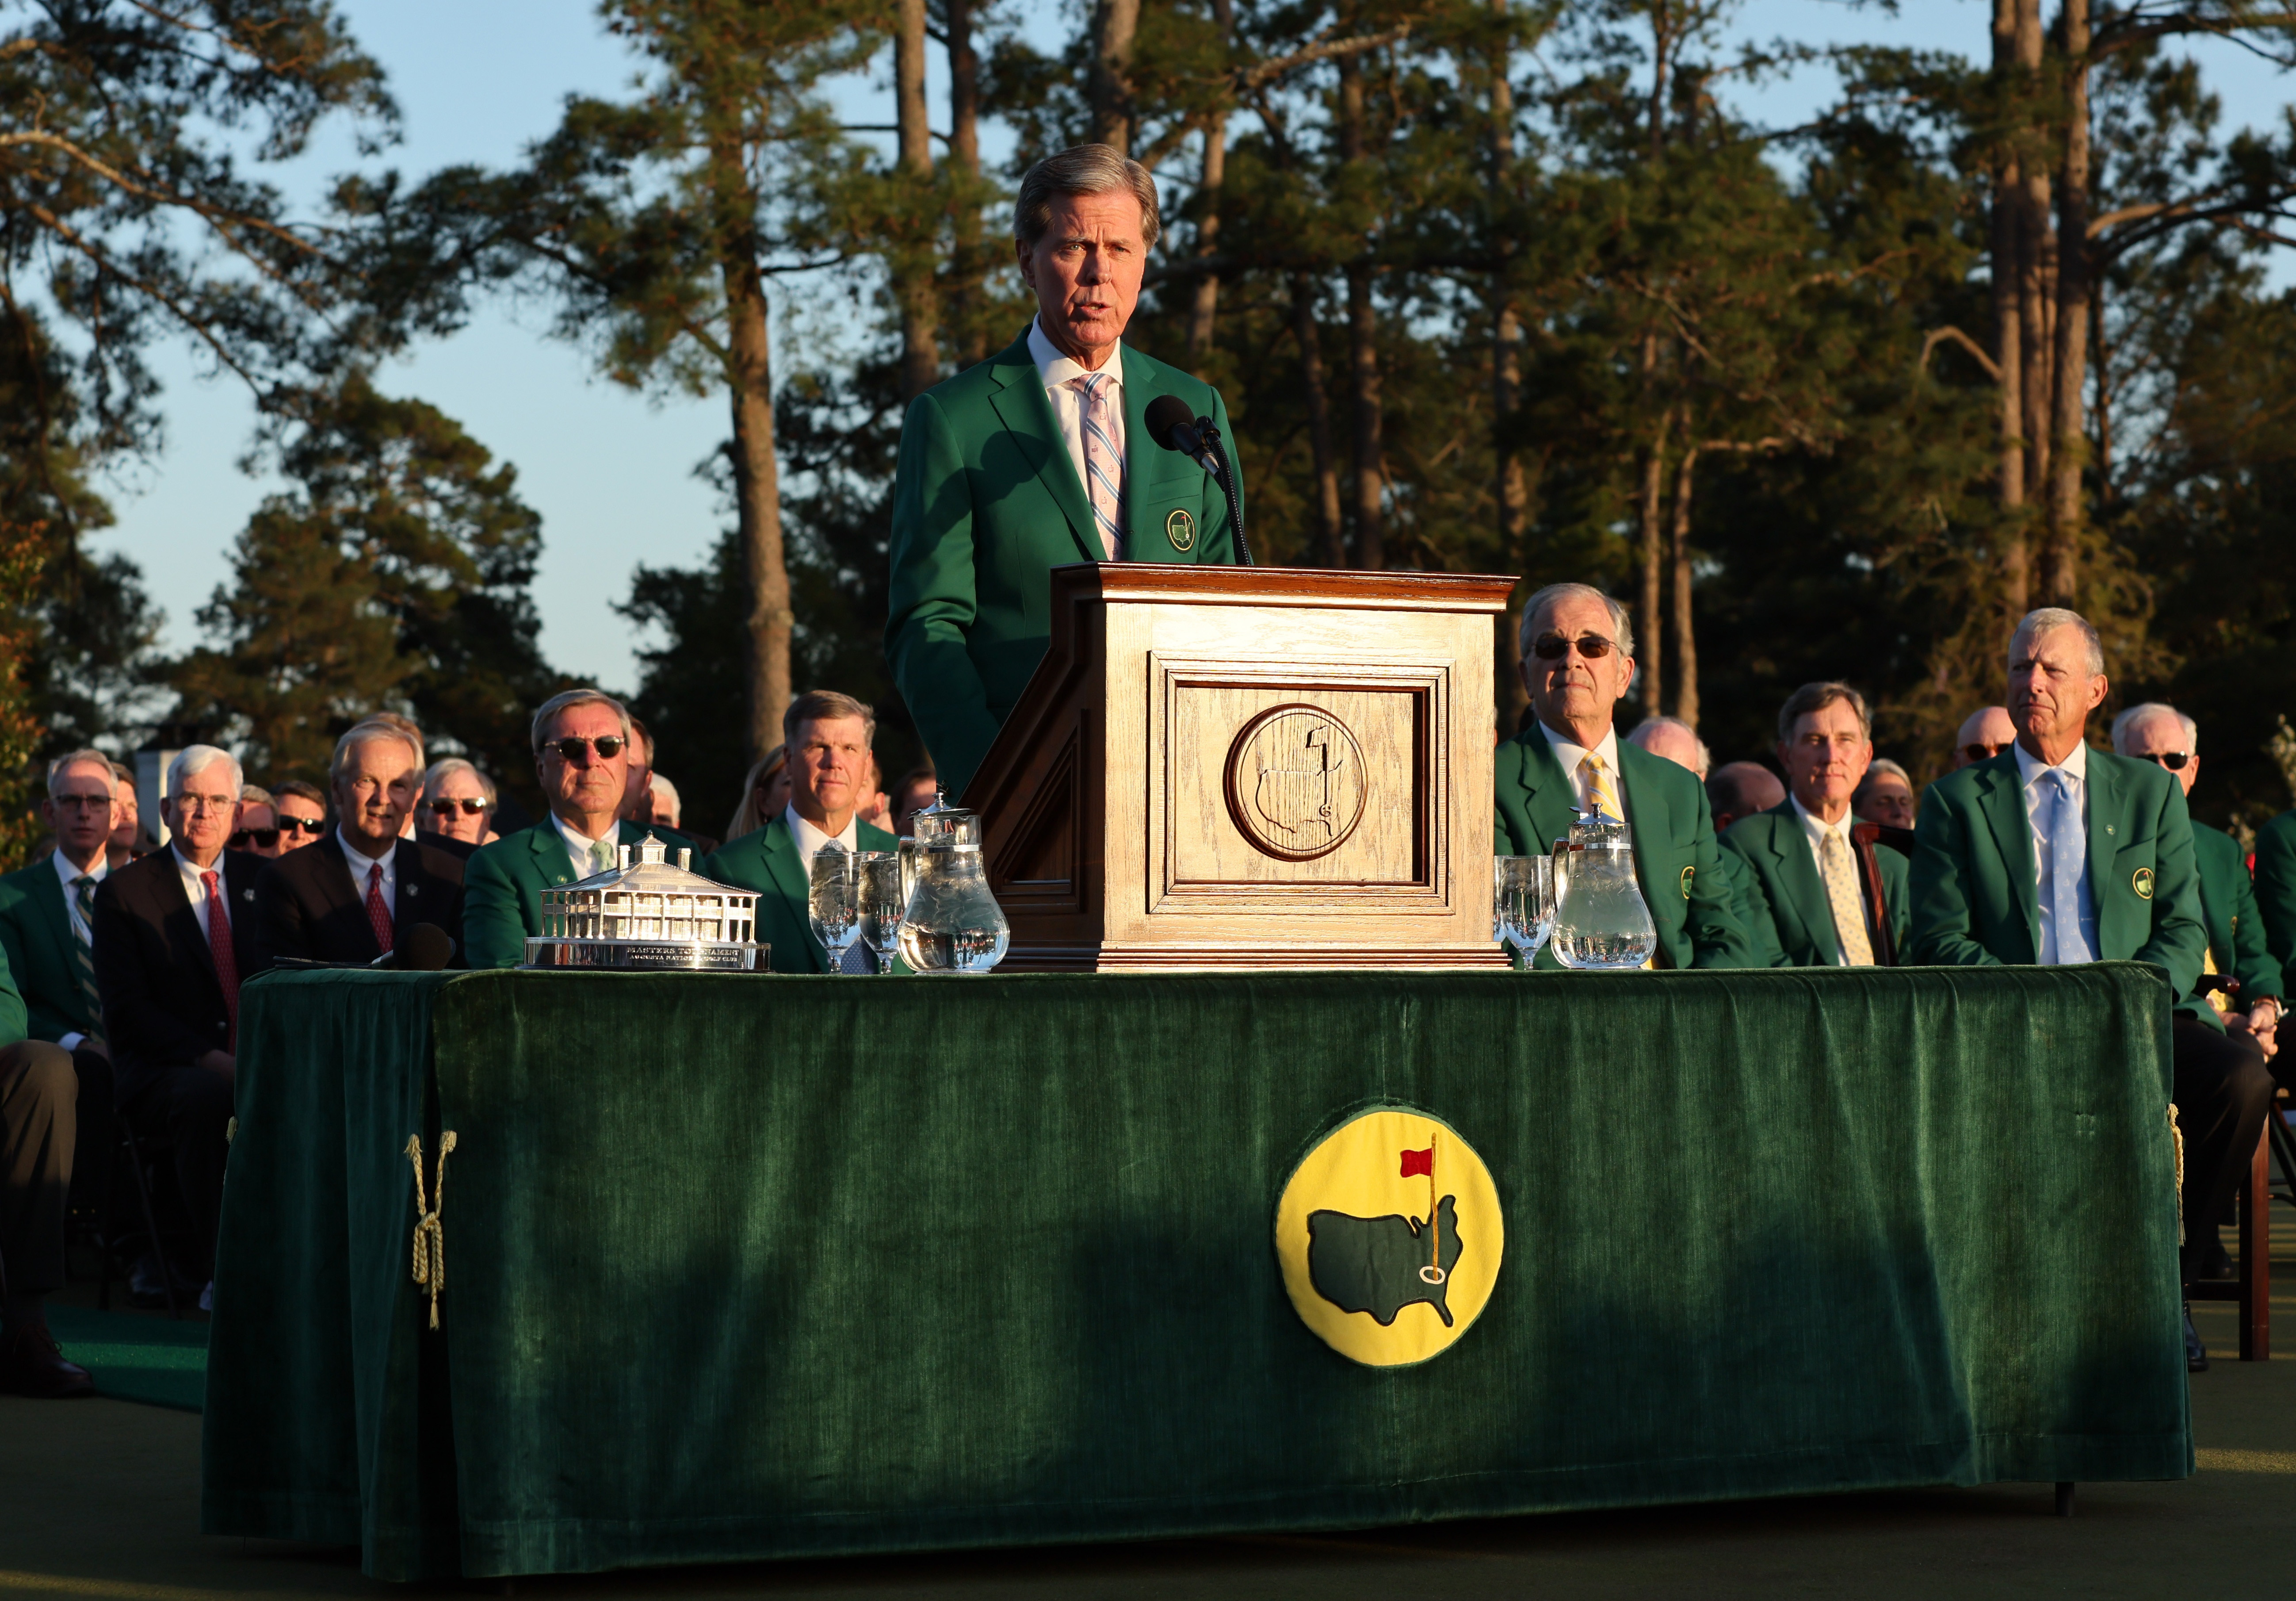 The Masters 2023 Invitations: Golfers confirmed to have received invitations